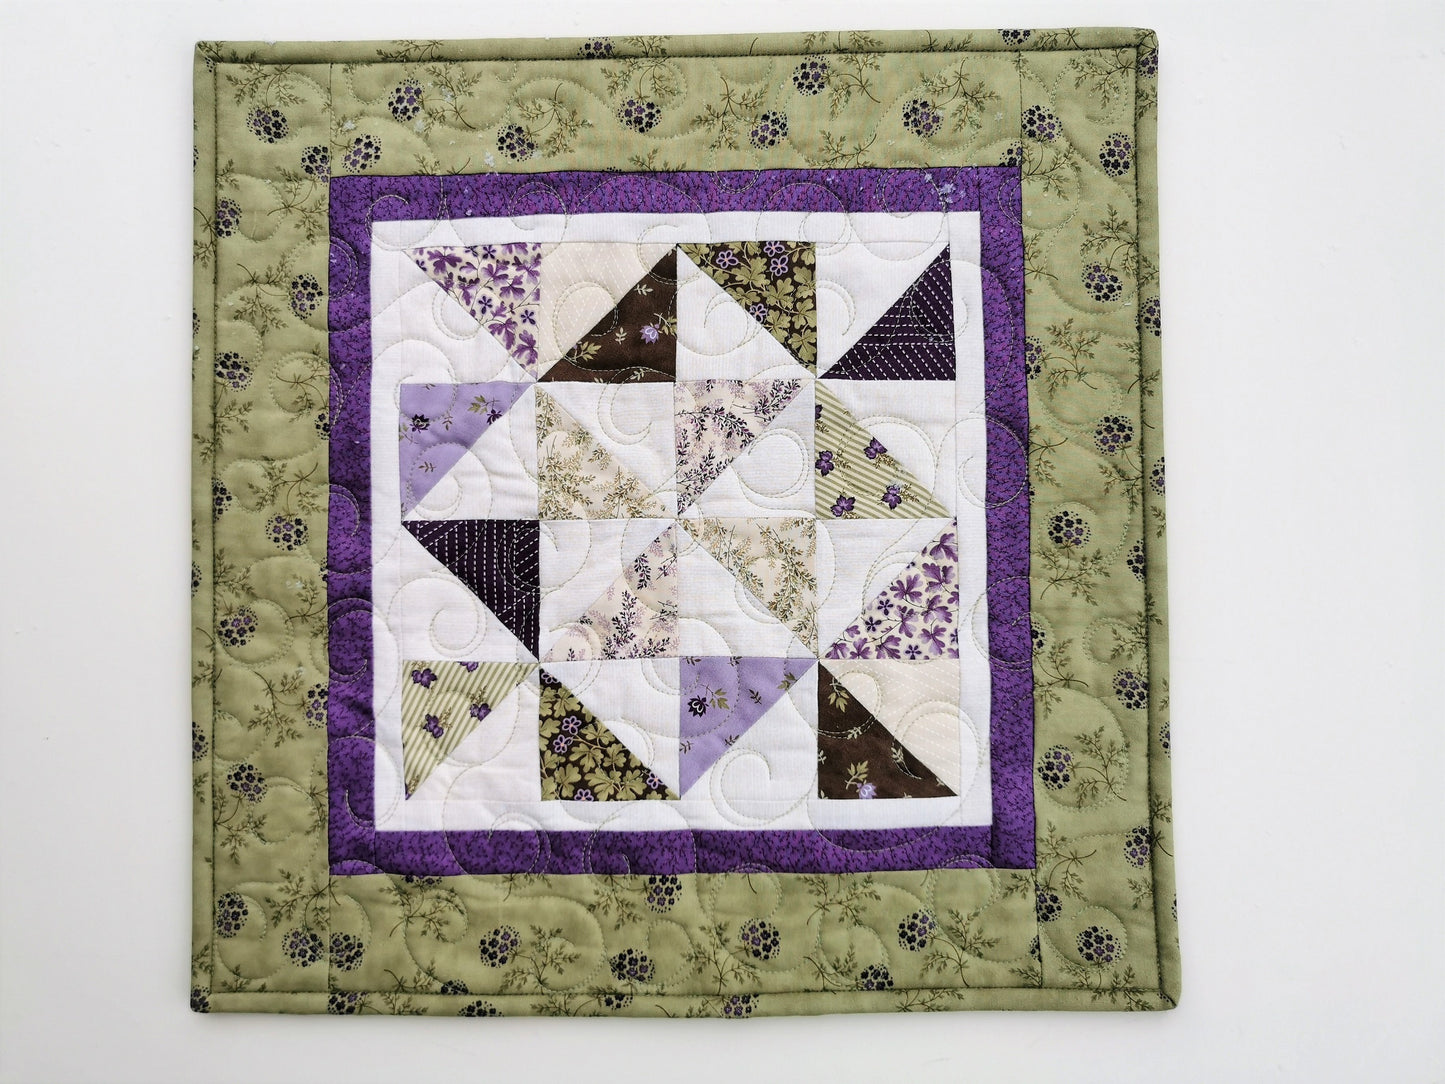 This square table topper has scrappy pinwheels in the center surrounded by a narrow purple border. Finished with a wider border in spring green with purple flowers. 